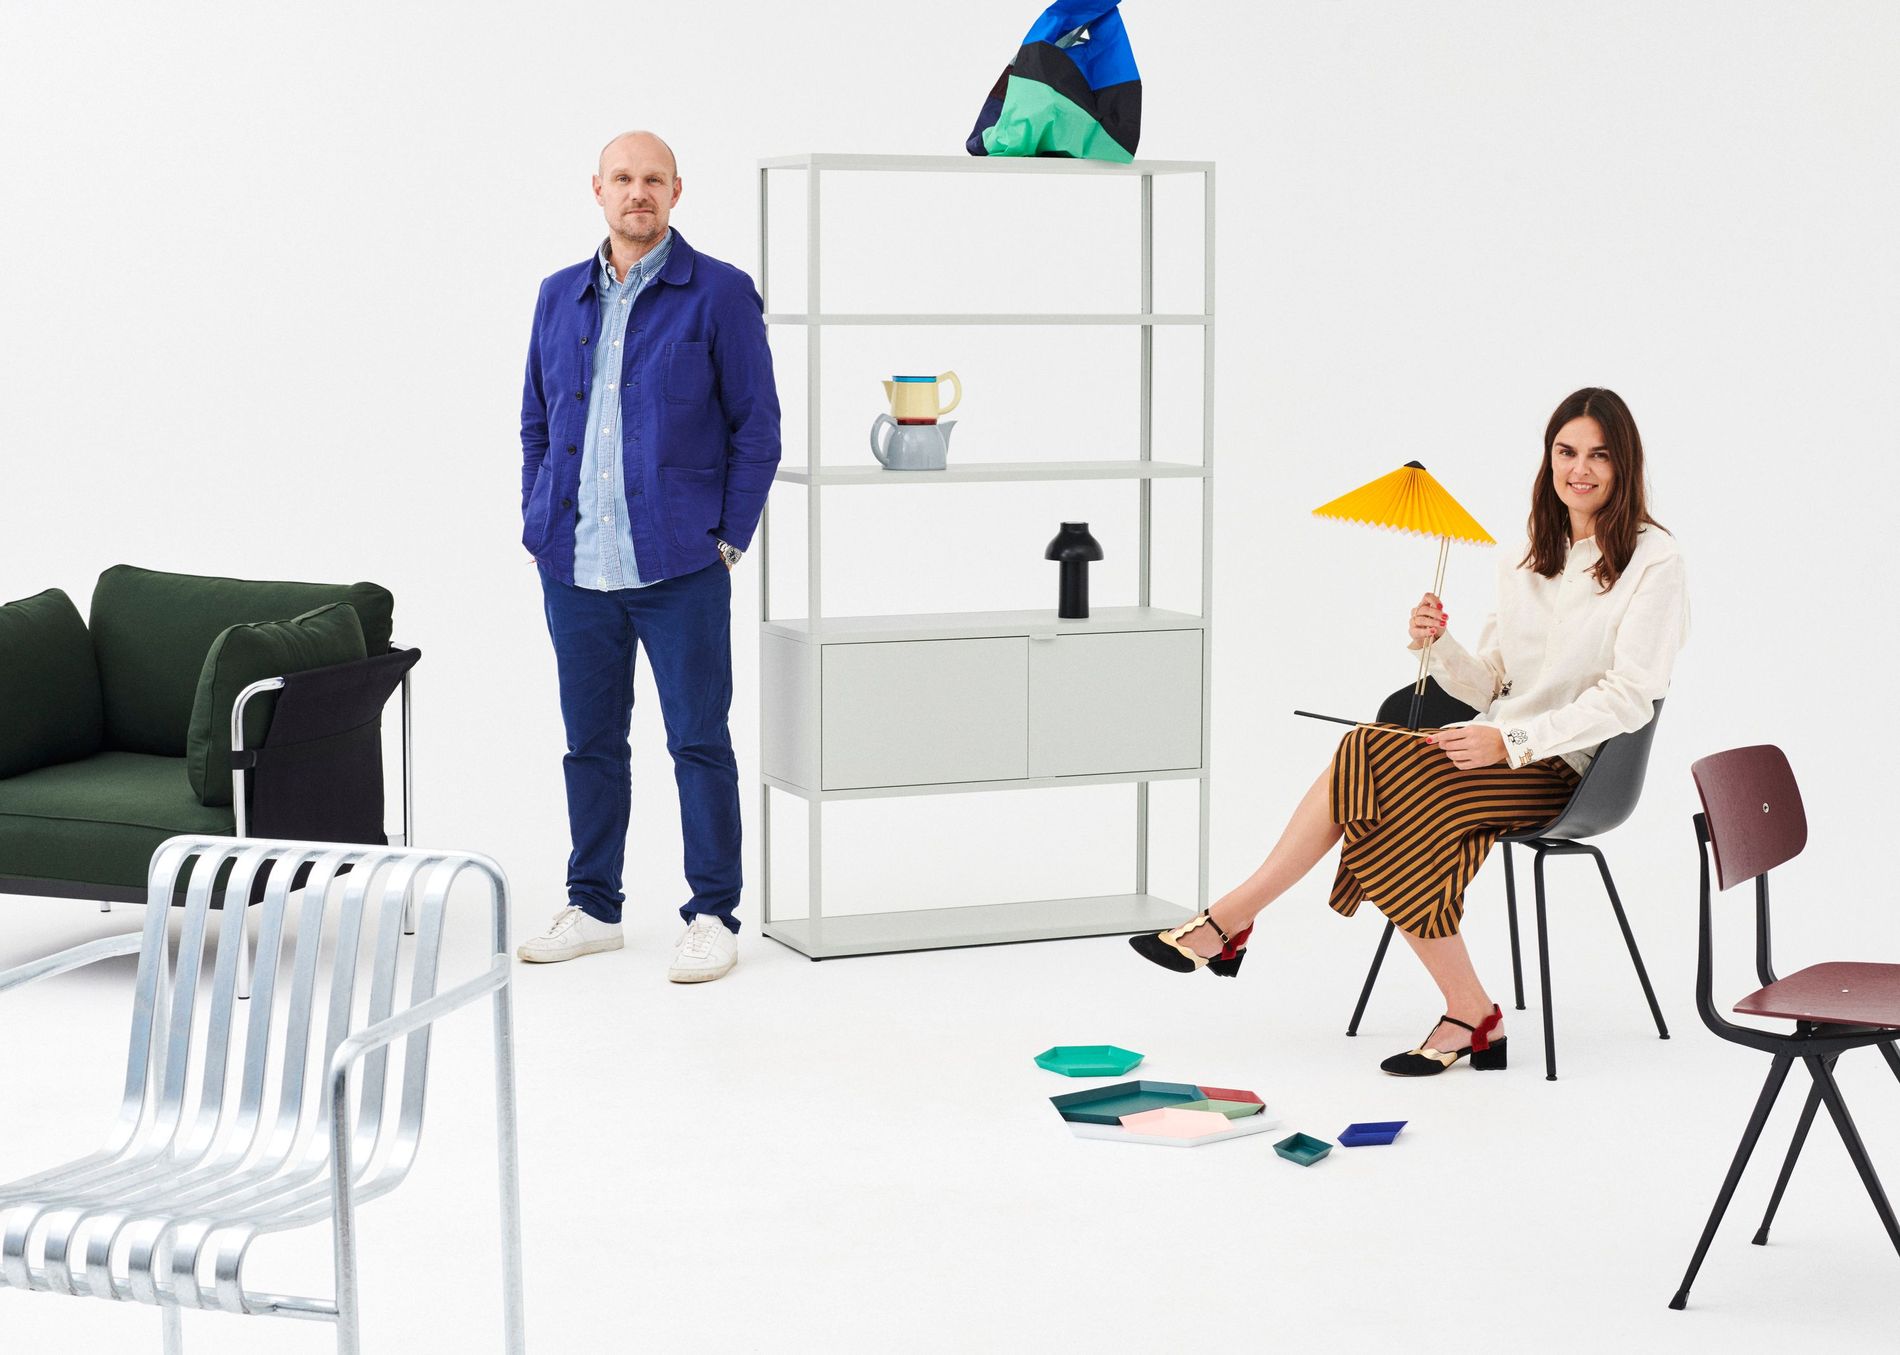 Mette and Rolf Hay surrounded by some of their furniture designs